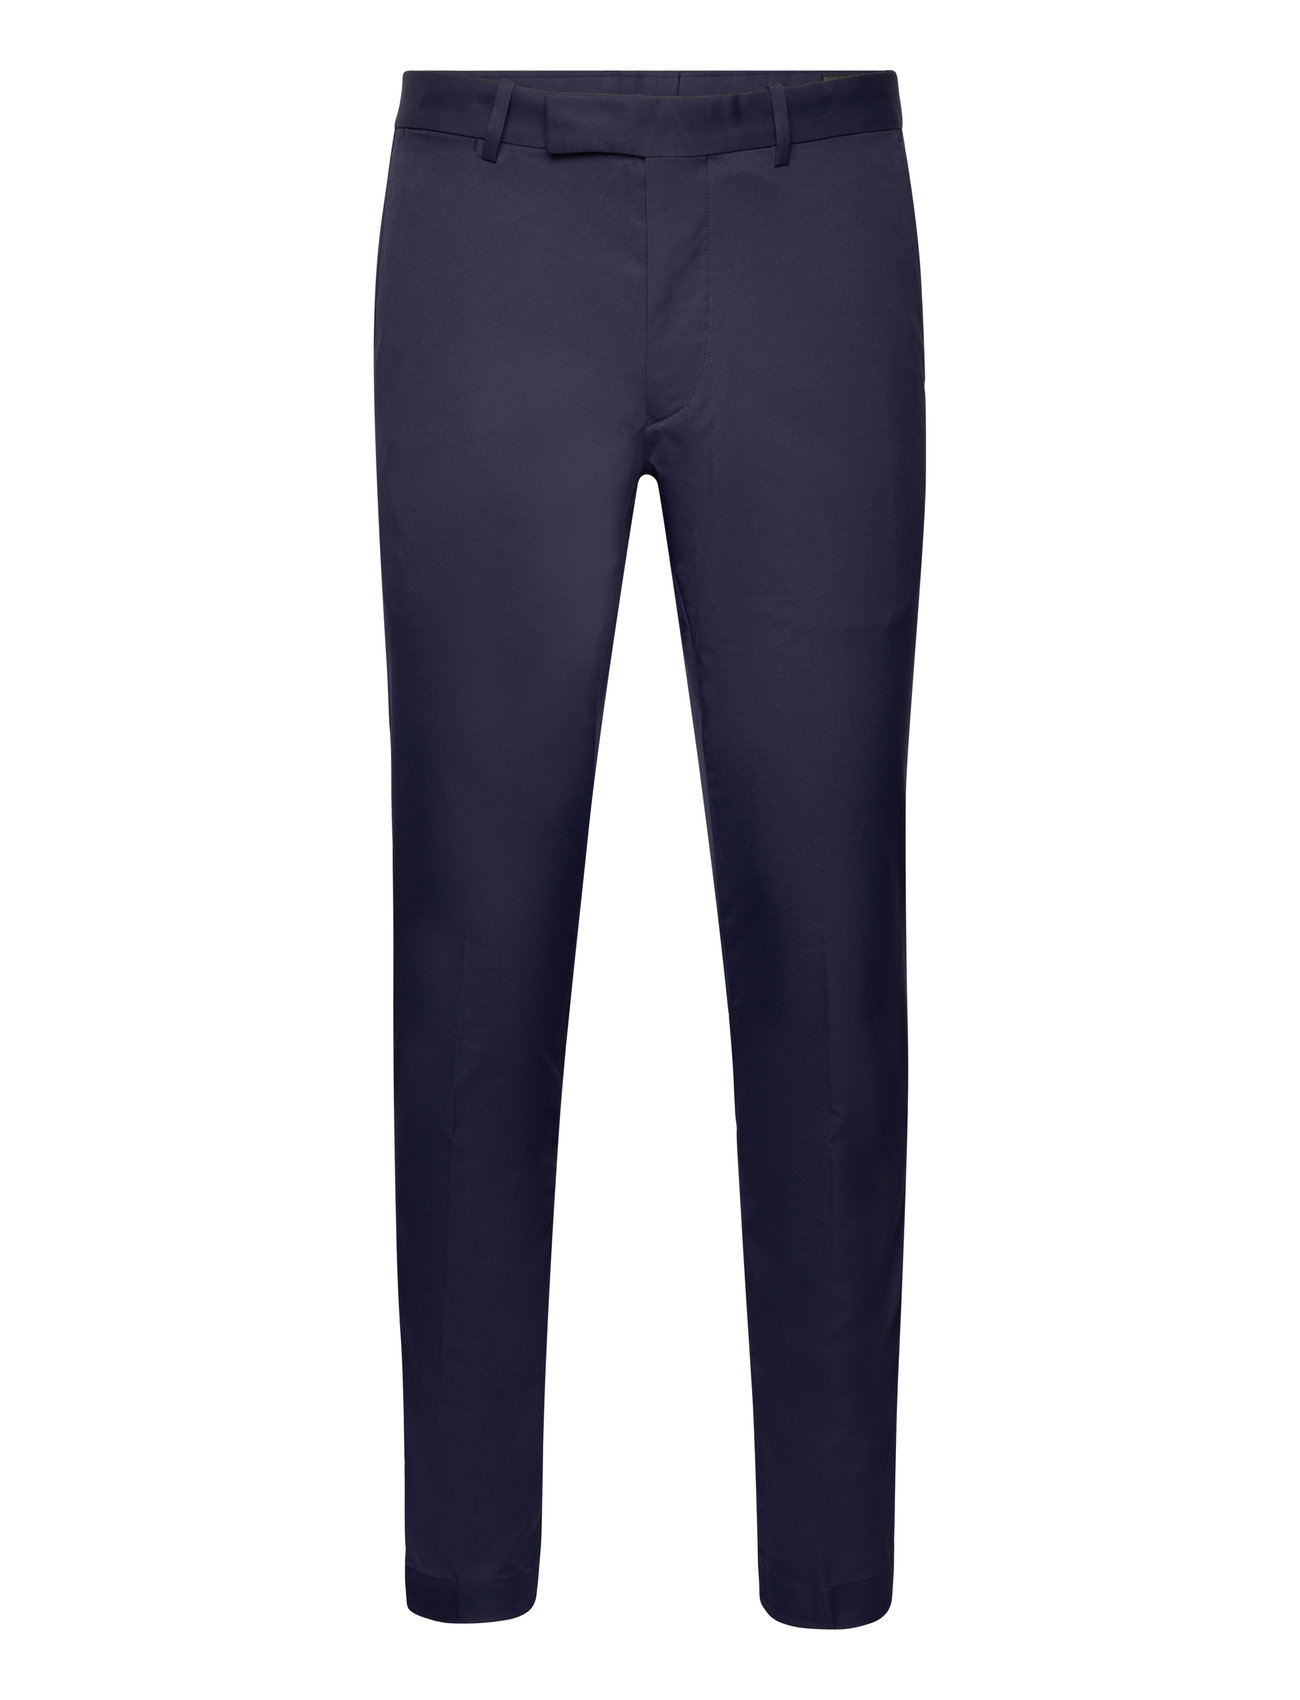 Slim Fit Performance Twill Pant Sport Trousers Chinos Navy Ralph Lauren Golf